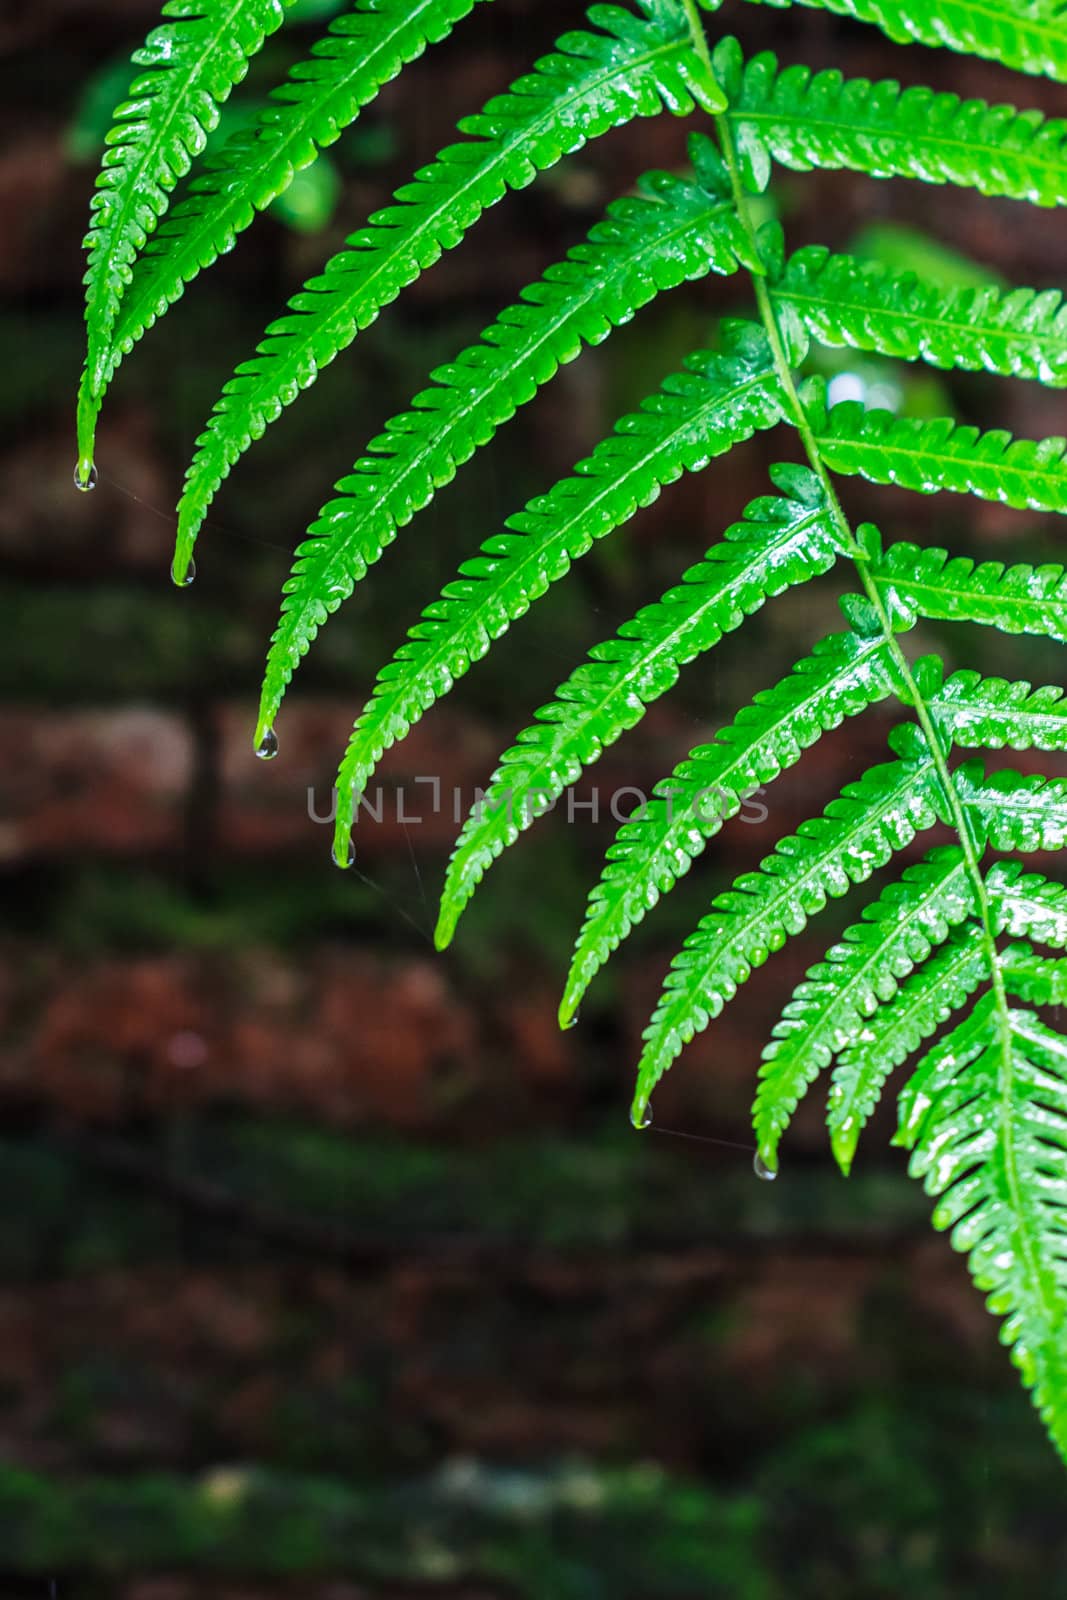 Fern Leaves with Water Droplets by punpleng